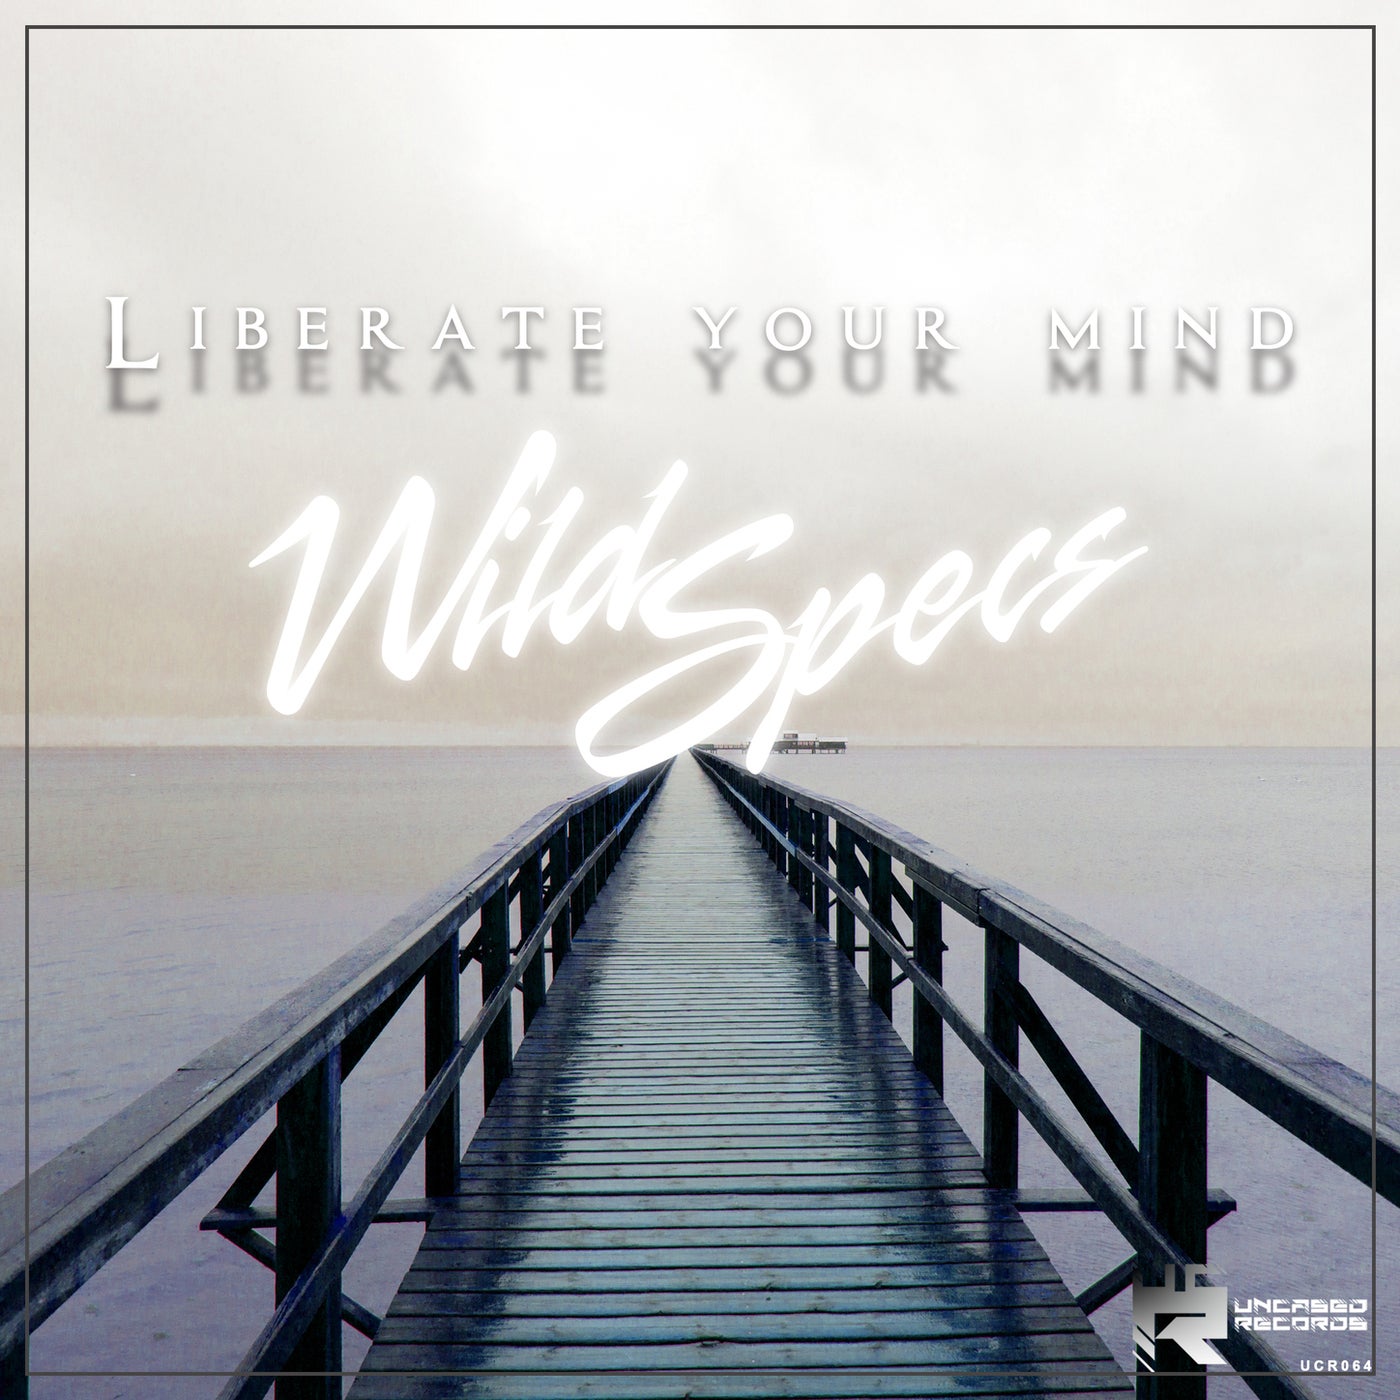 Liberate Your Mind